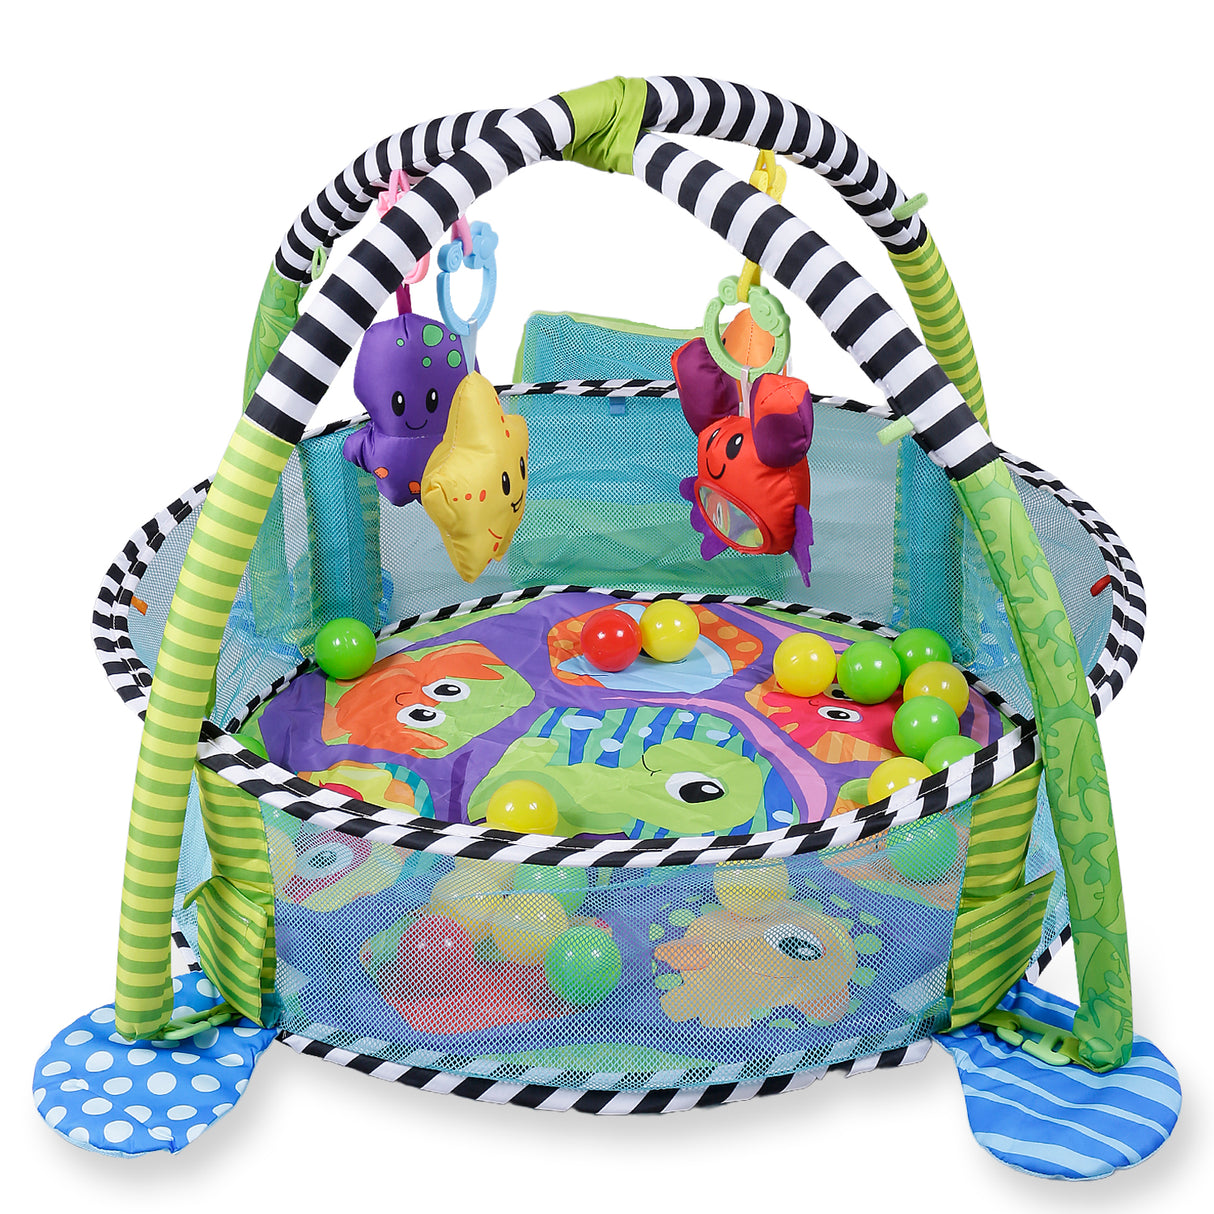 Baby Moo Turtle Infant Play Mat Activity Gym With Hanging Toys And Balls Green